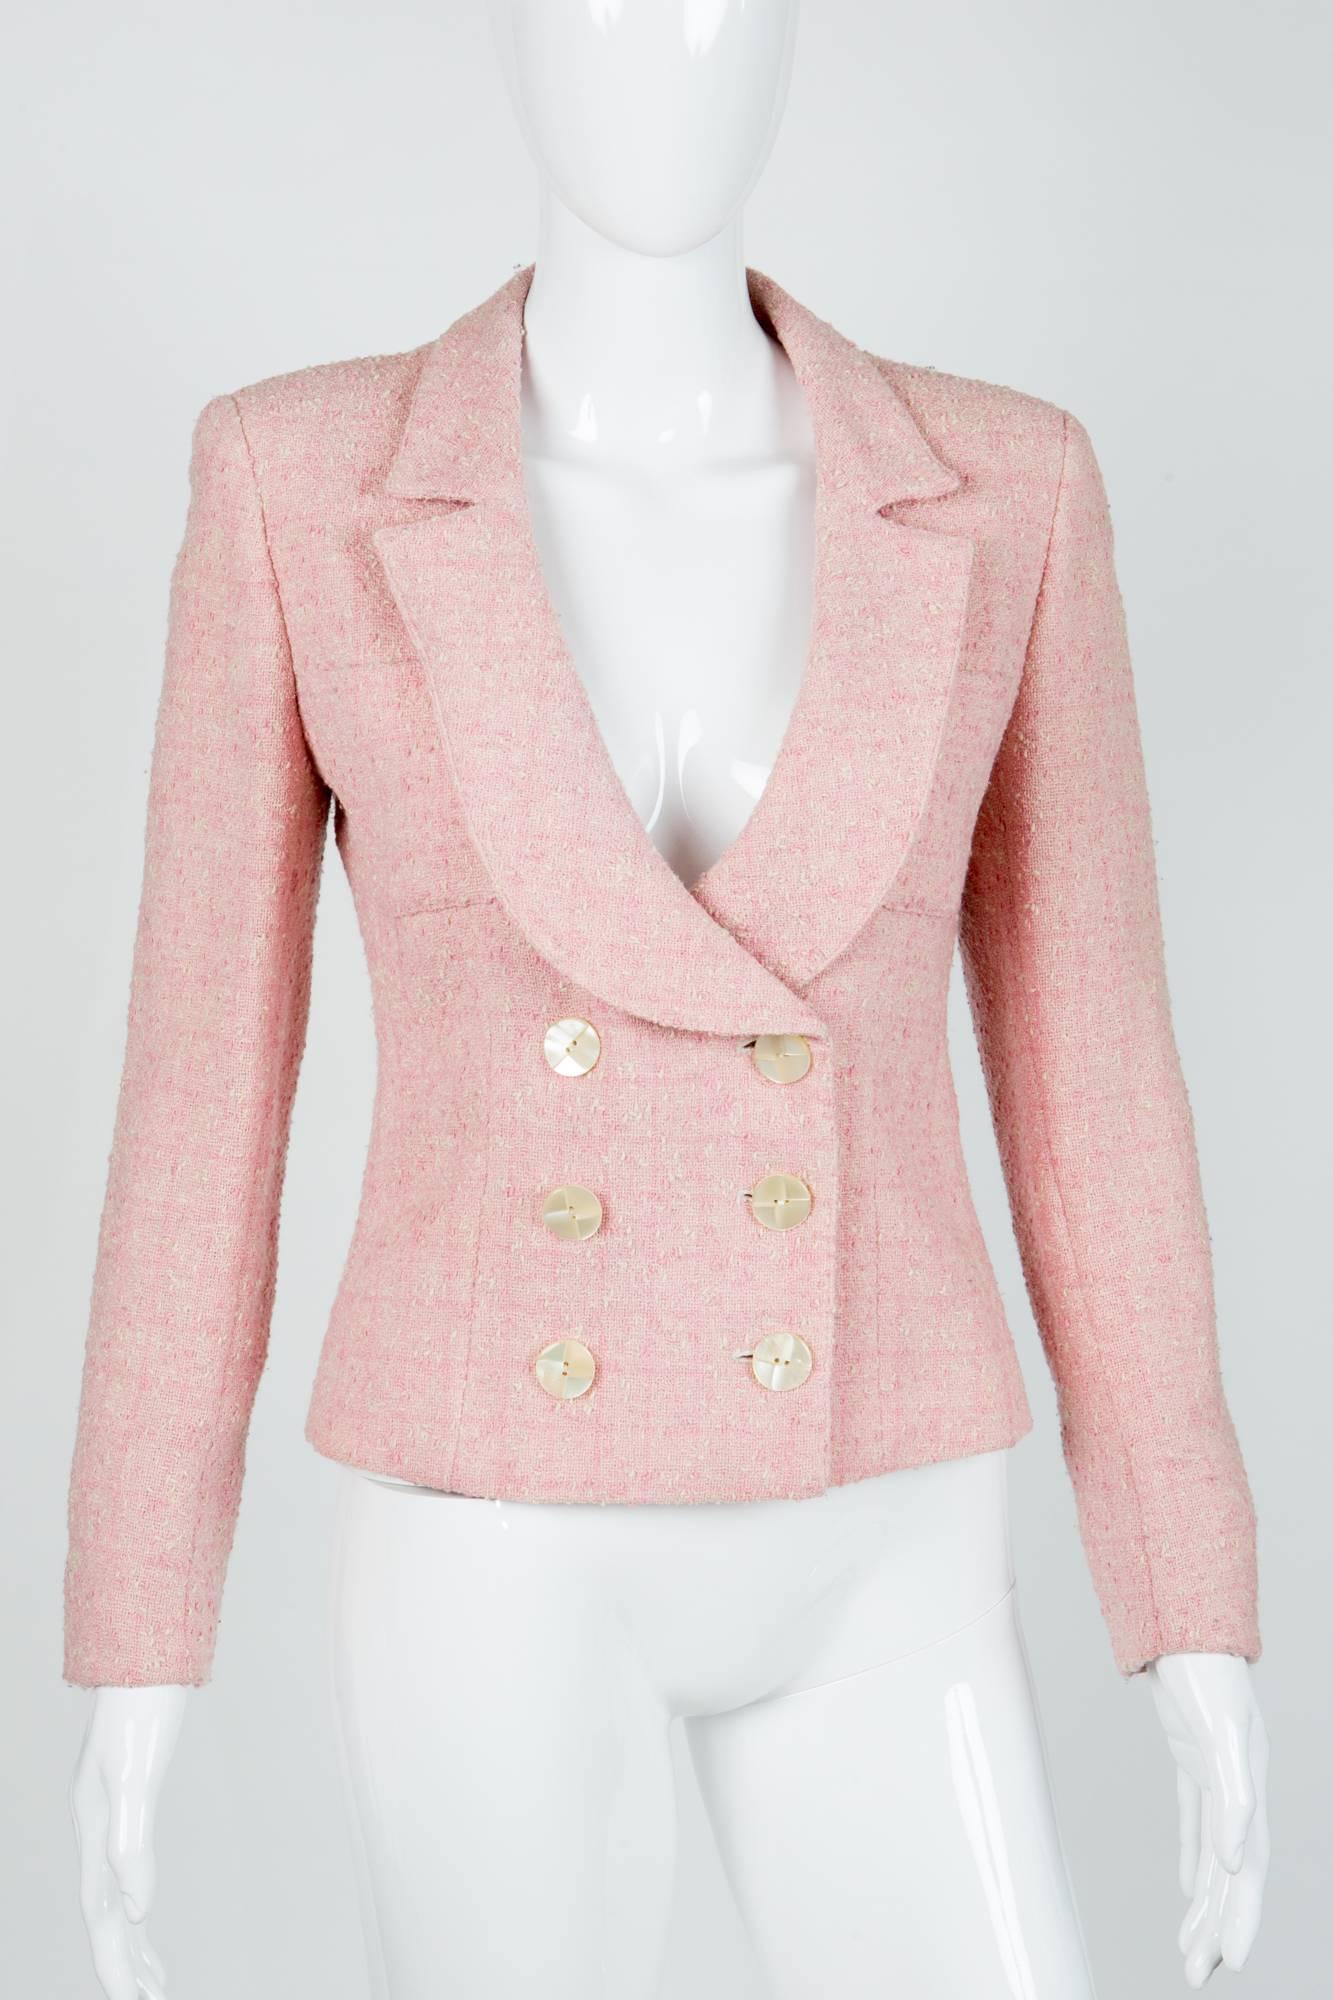 Valentino Miss VPink tweed jacket featuring a double breast button opening, padded shoulders, a  feminine fitted waist.
In excellent vintage condition. Made in Italy.
Estimated size 38fr/US6 /UK10
We guarantee you will receive this gorgeous item as